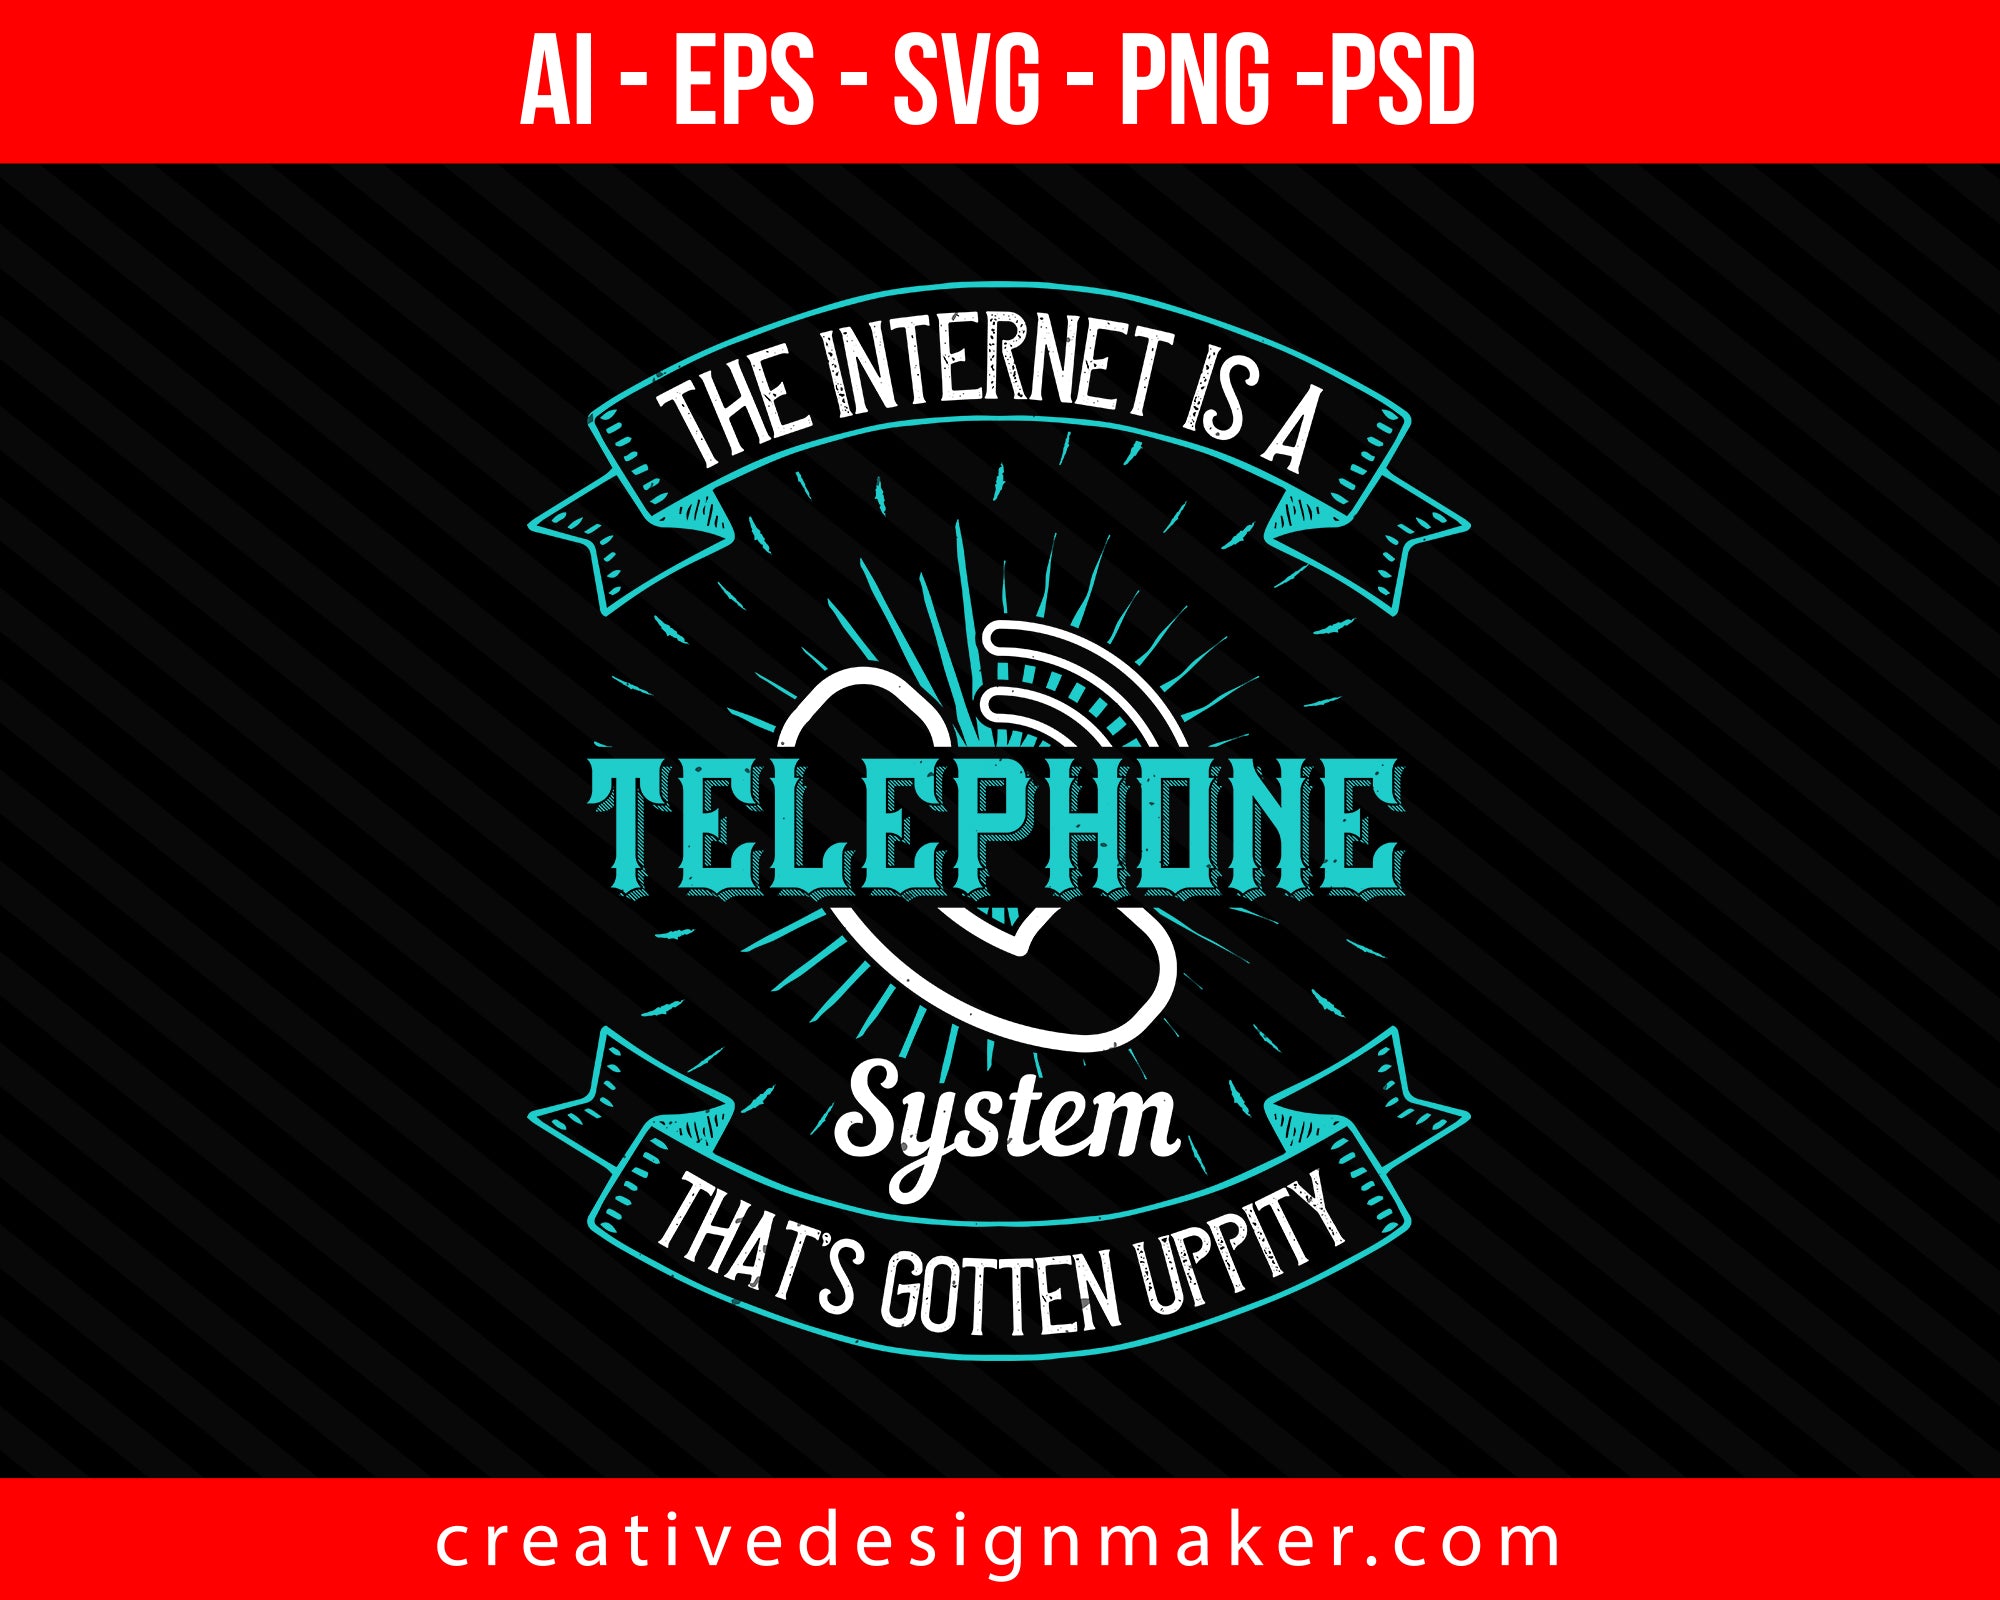 The internet is a telephone system that's gotten uppity Print Ready Editable T-Shirt SVG Design!